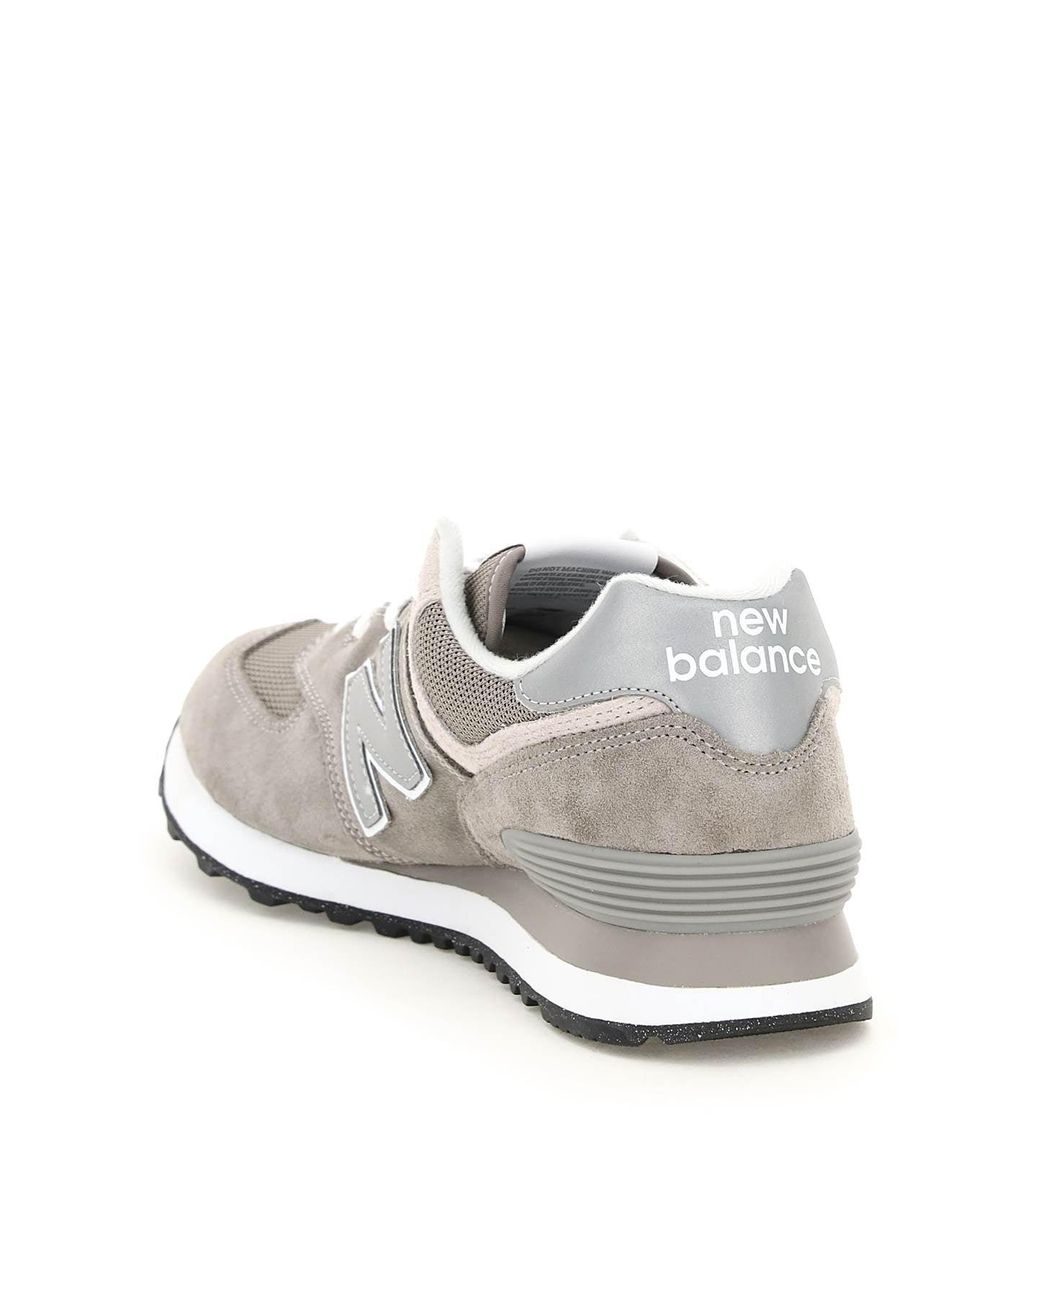 New Balance Suede 574 Sneakers in Grey (Gray) - Lyst